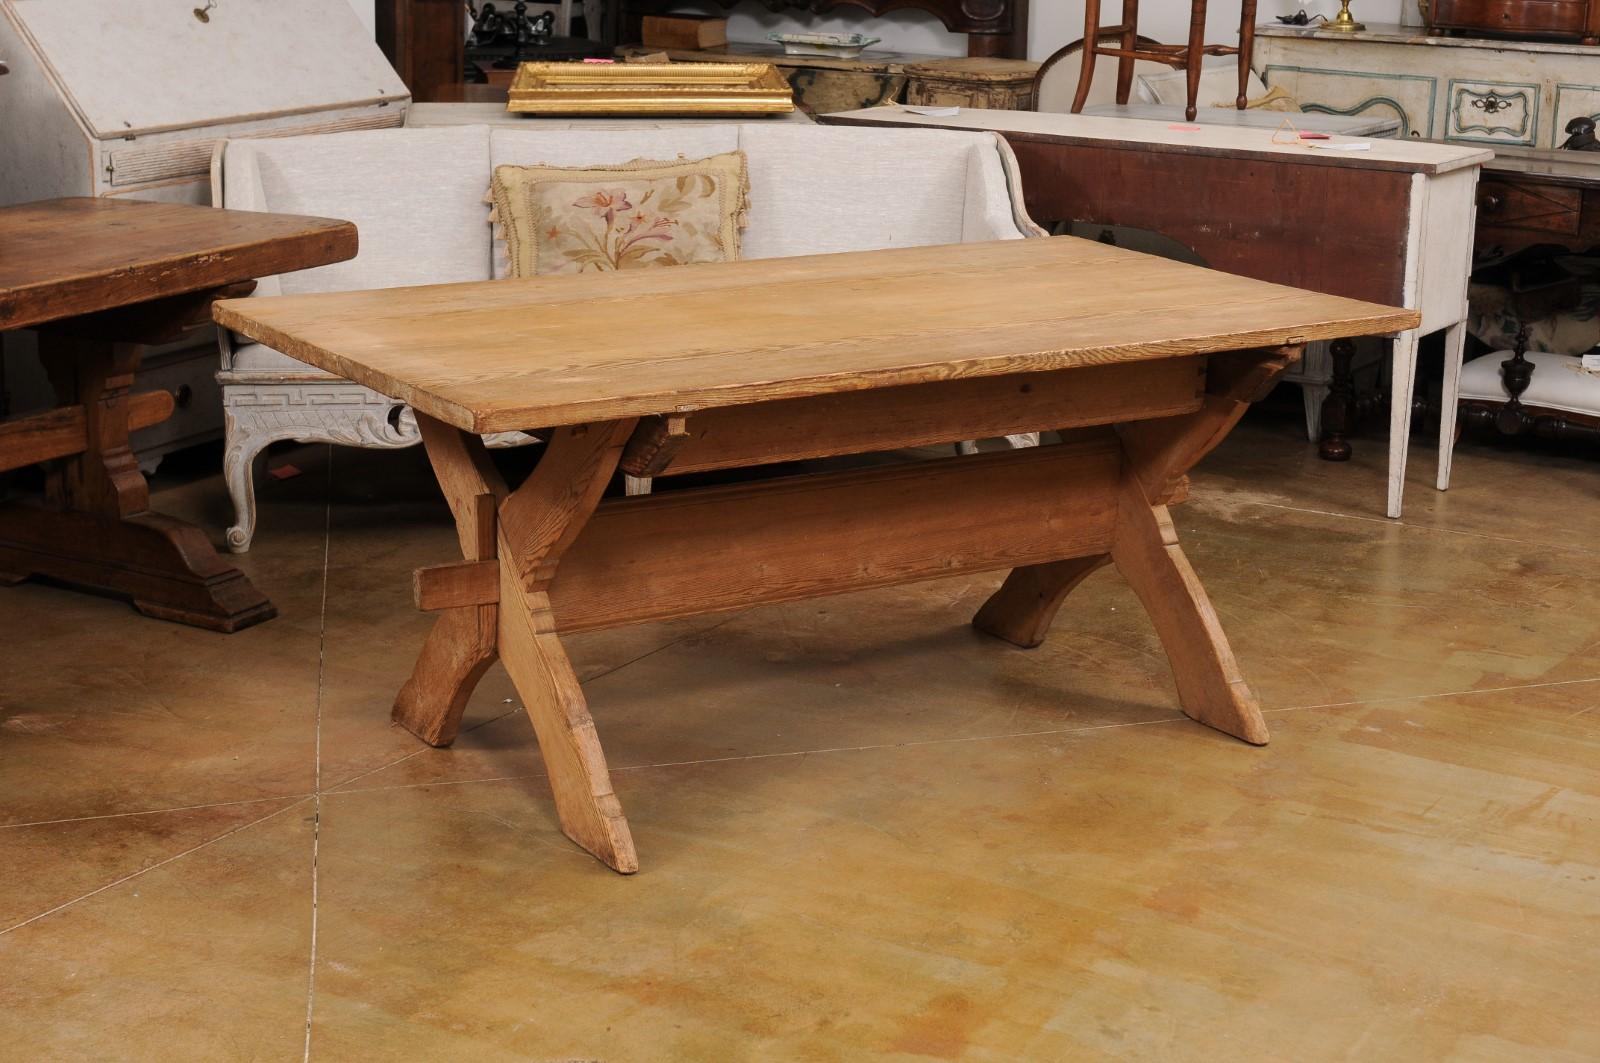 Swedish 1790s European Pine Sawbuck Table with Drawer and Double X-Form Legs For Sale 3